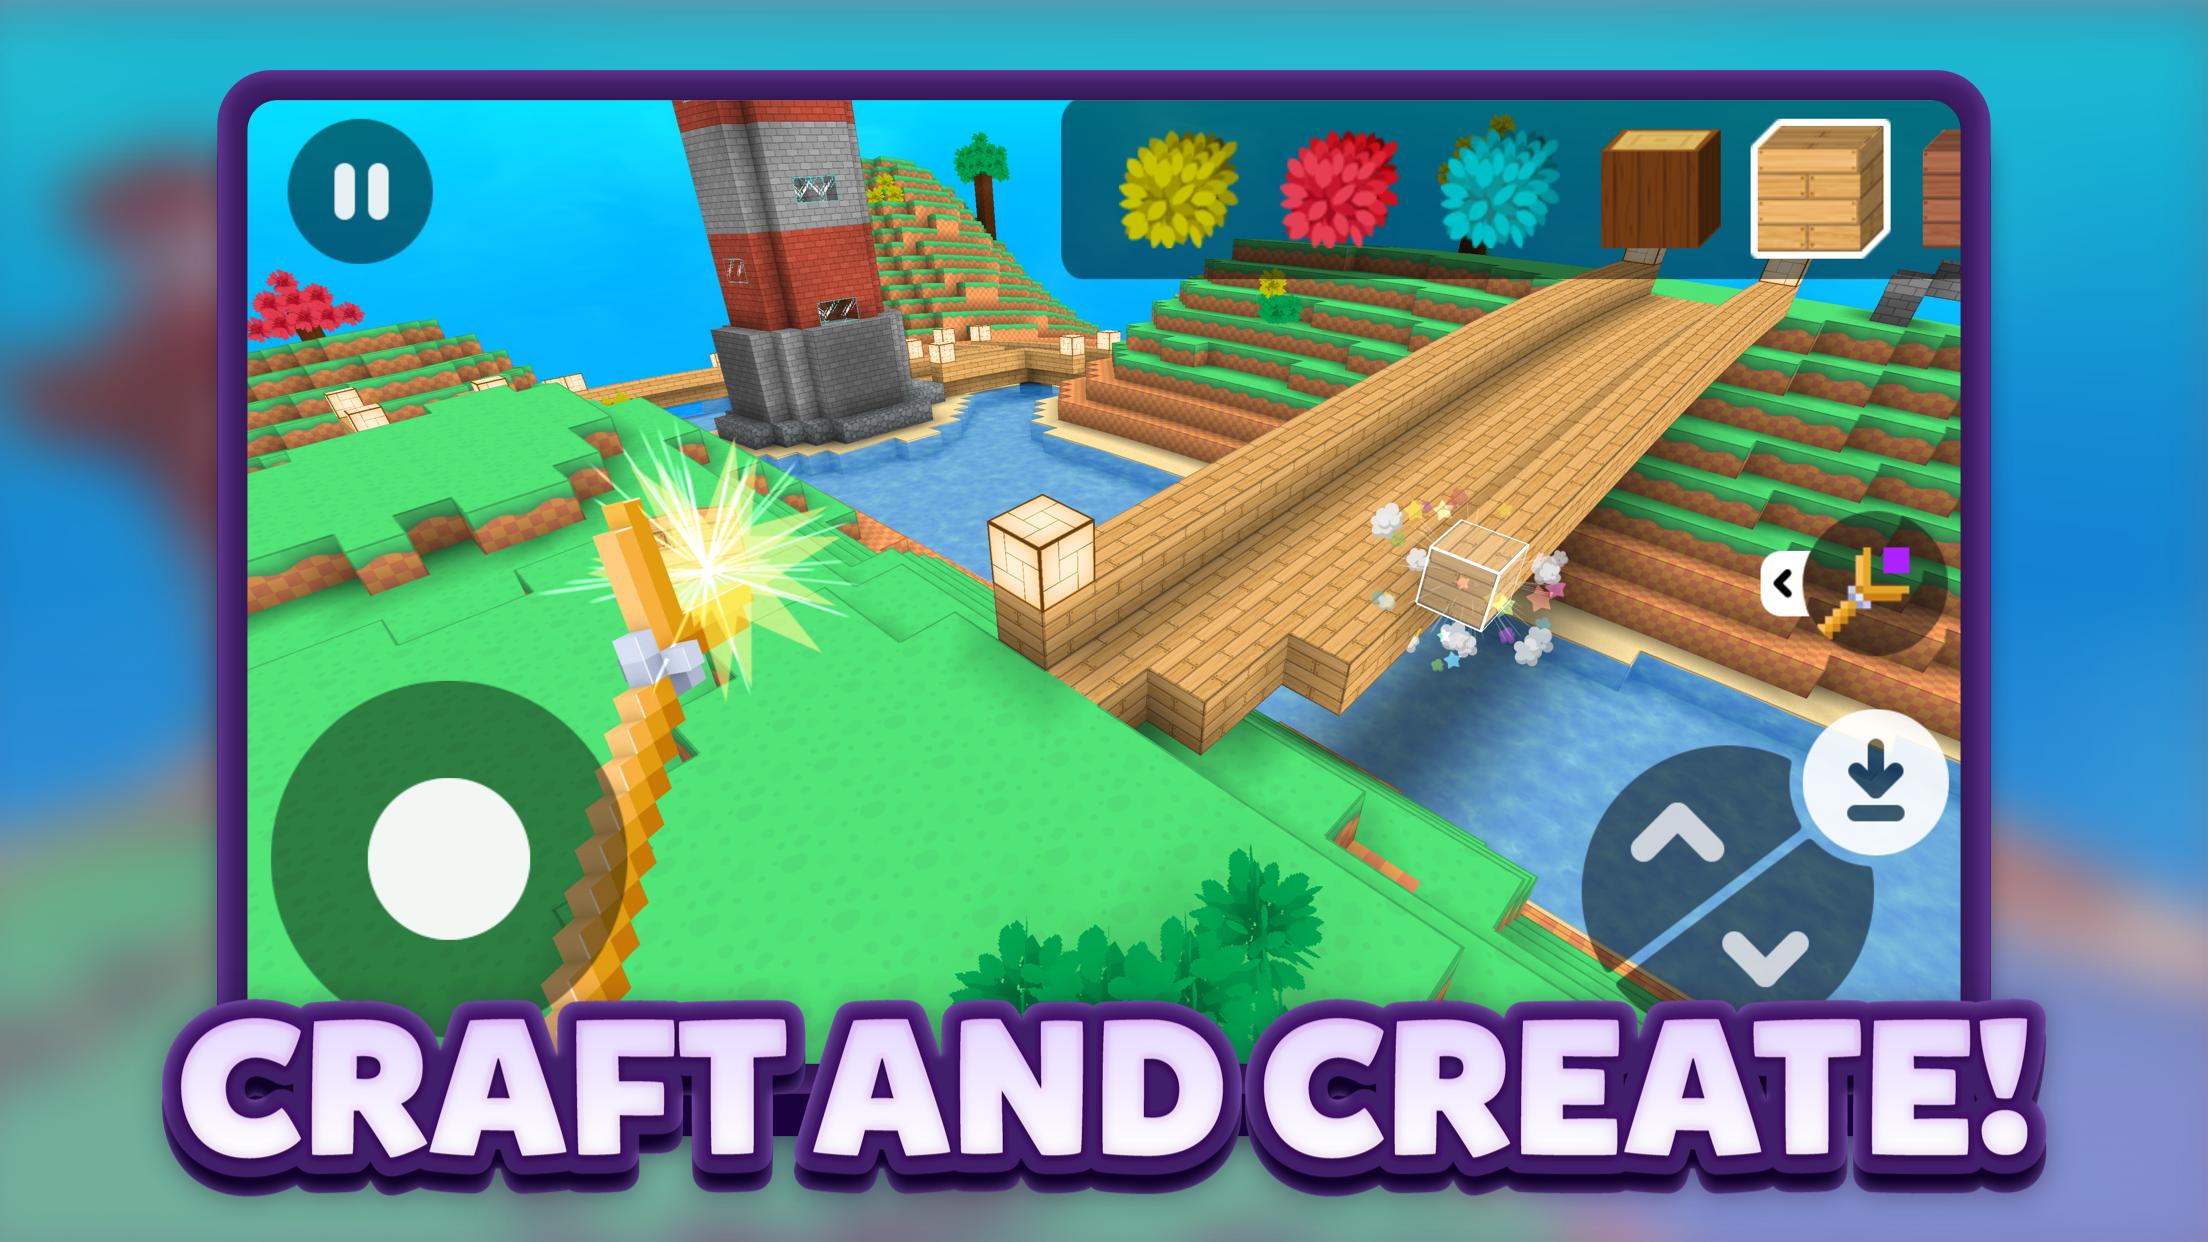 Crafty Lands for Android - APK Download